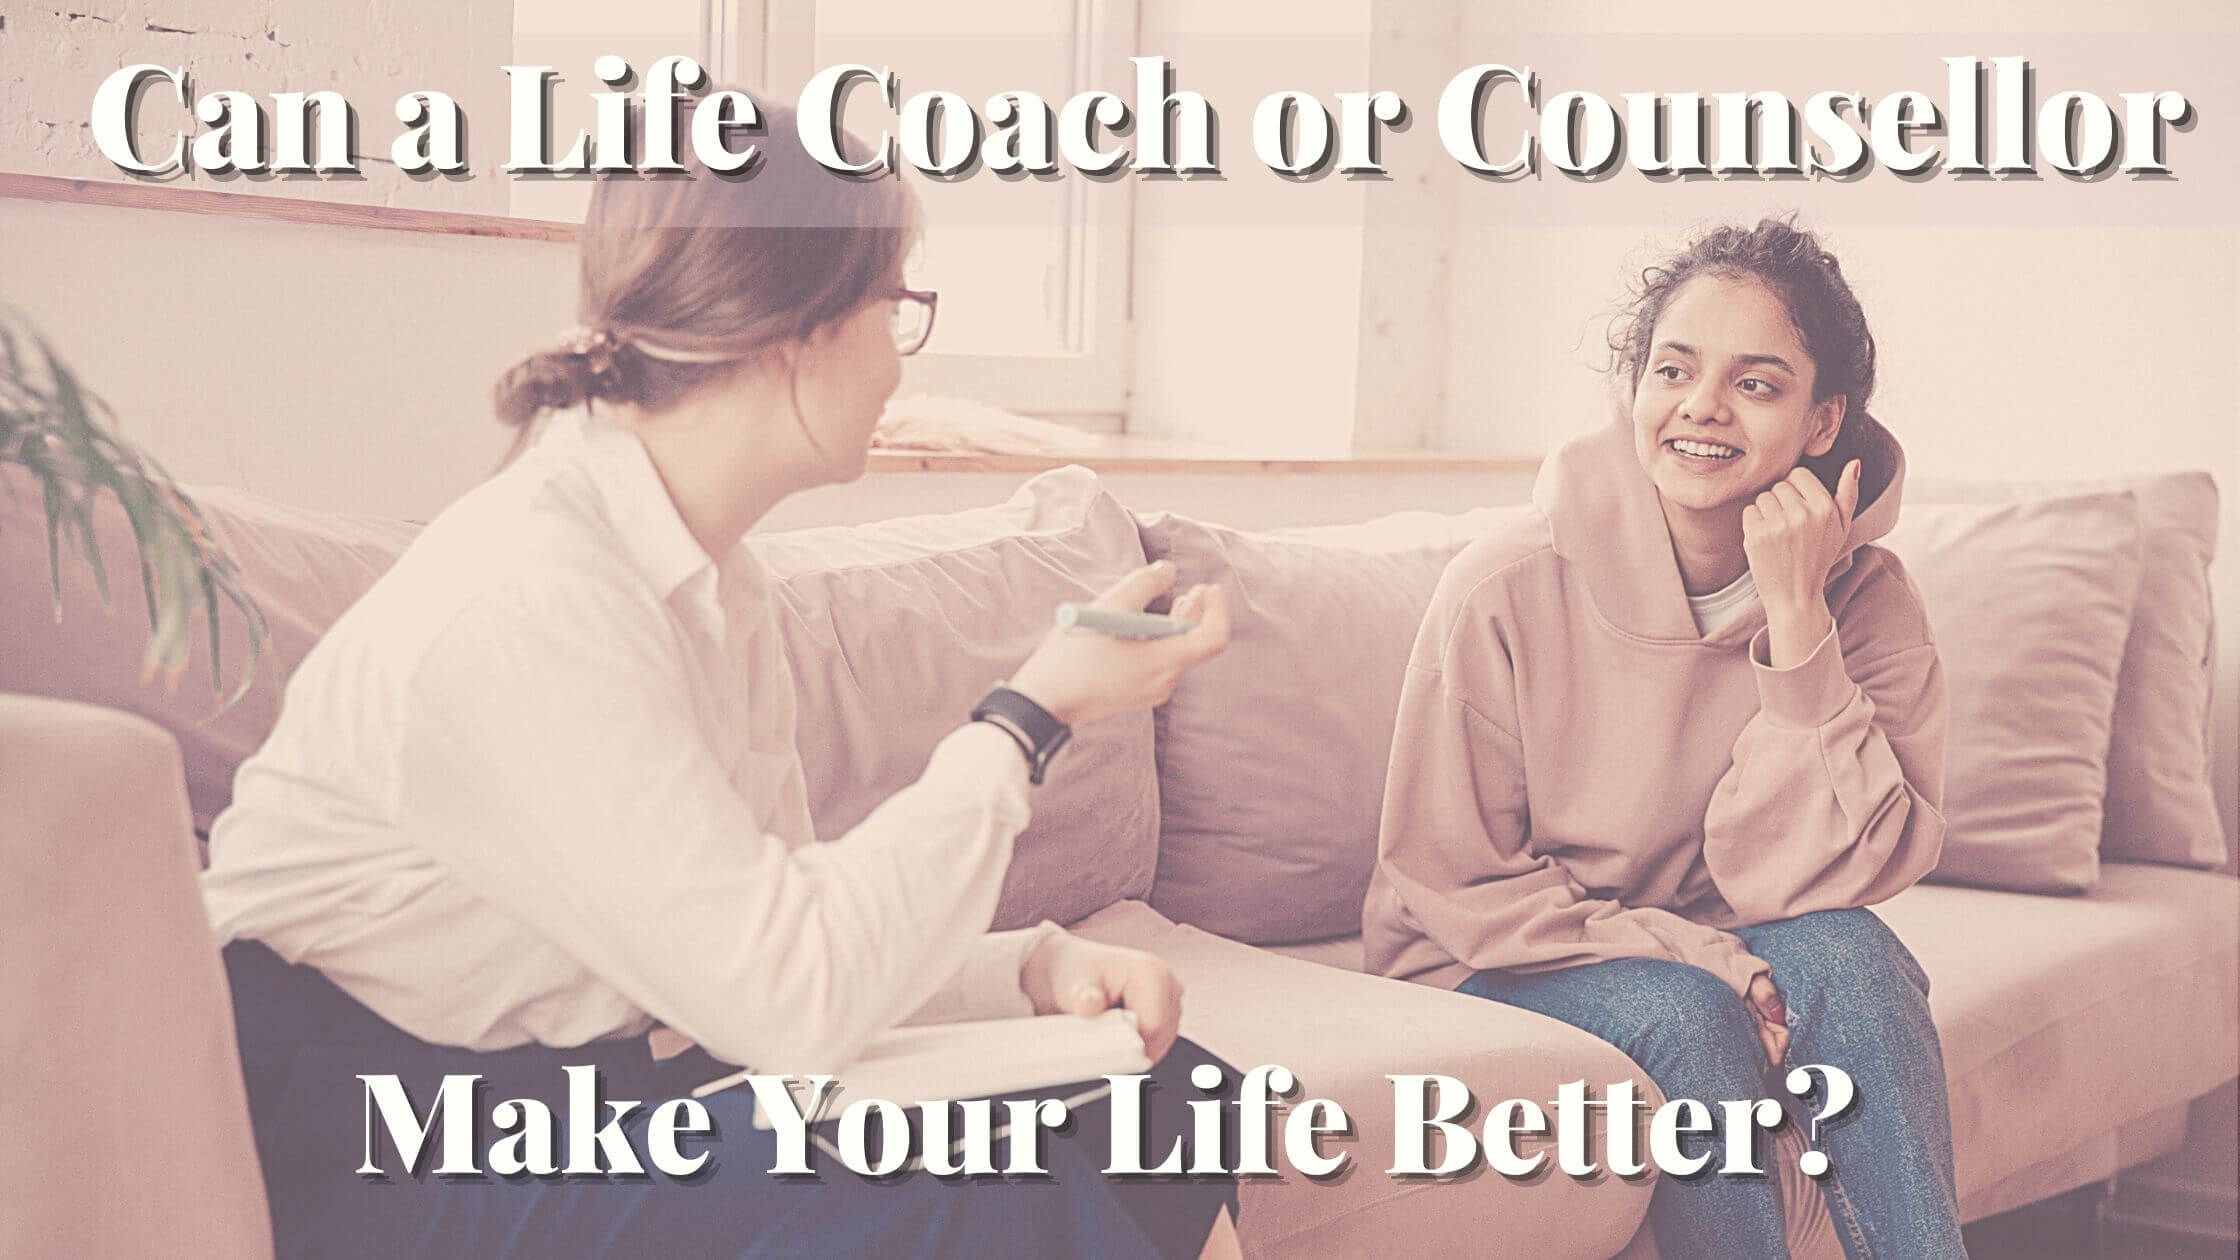 Woman sitting with counsellor Can a Life Coach or Counsellor Make Your Life Better?